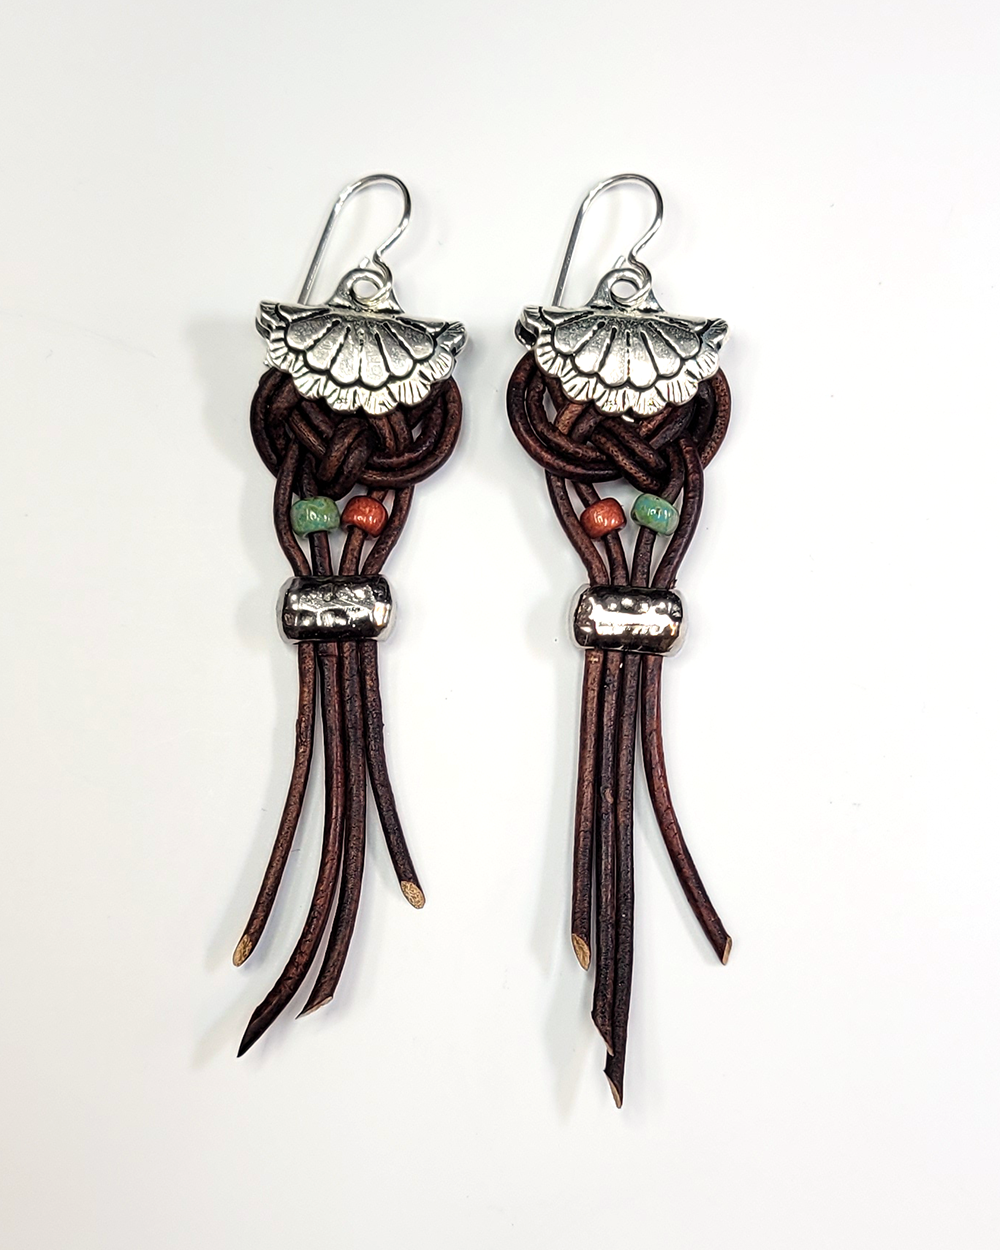 josephine-knot-earrings-project-page.png